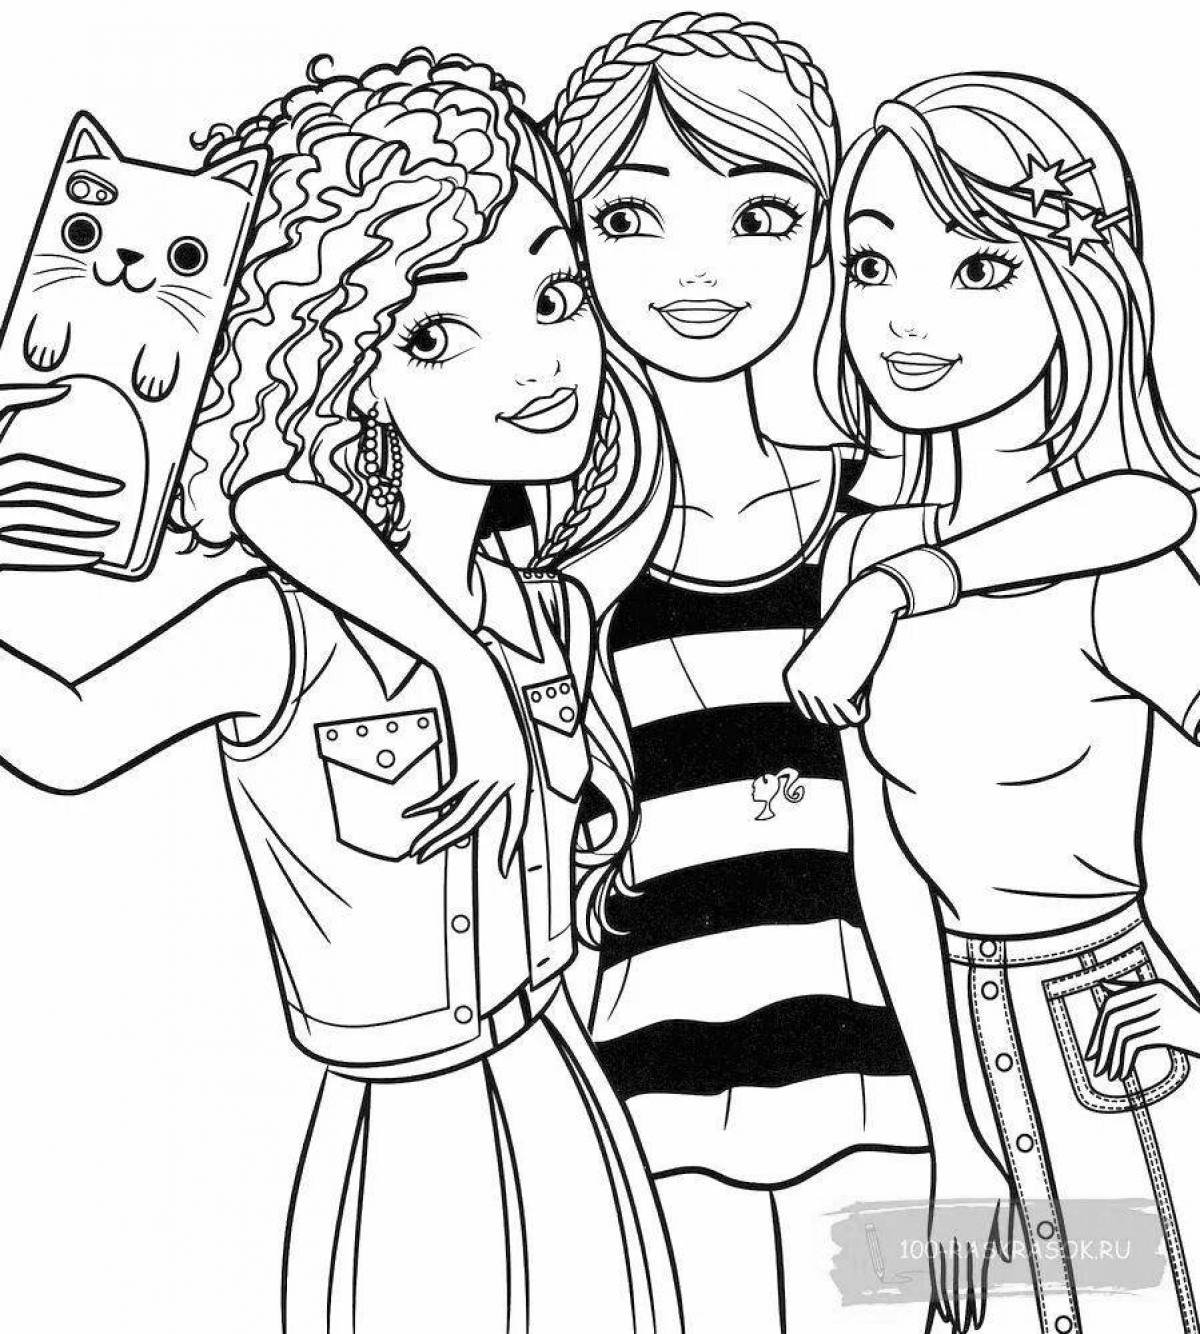 Adorable coloring book for girls 12-13 years old